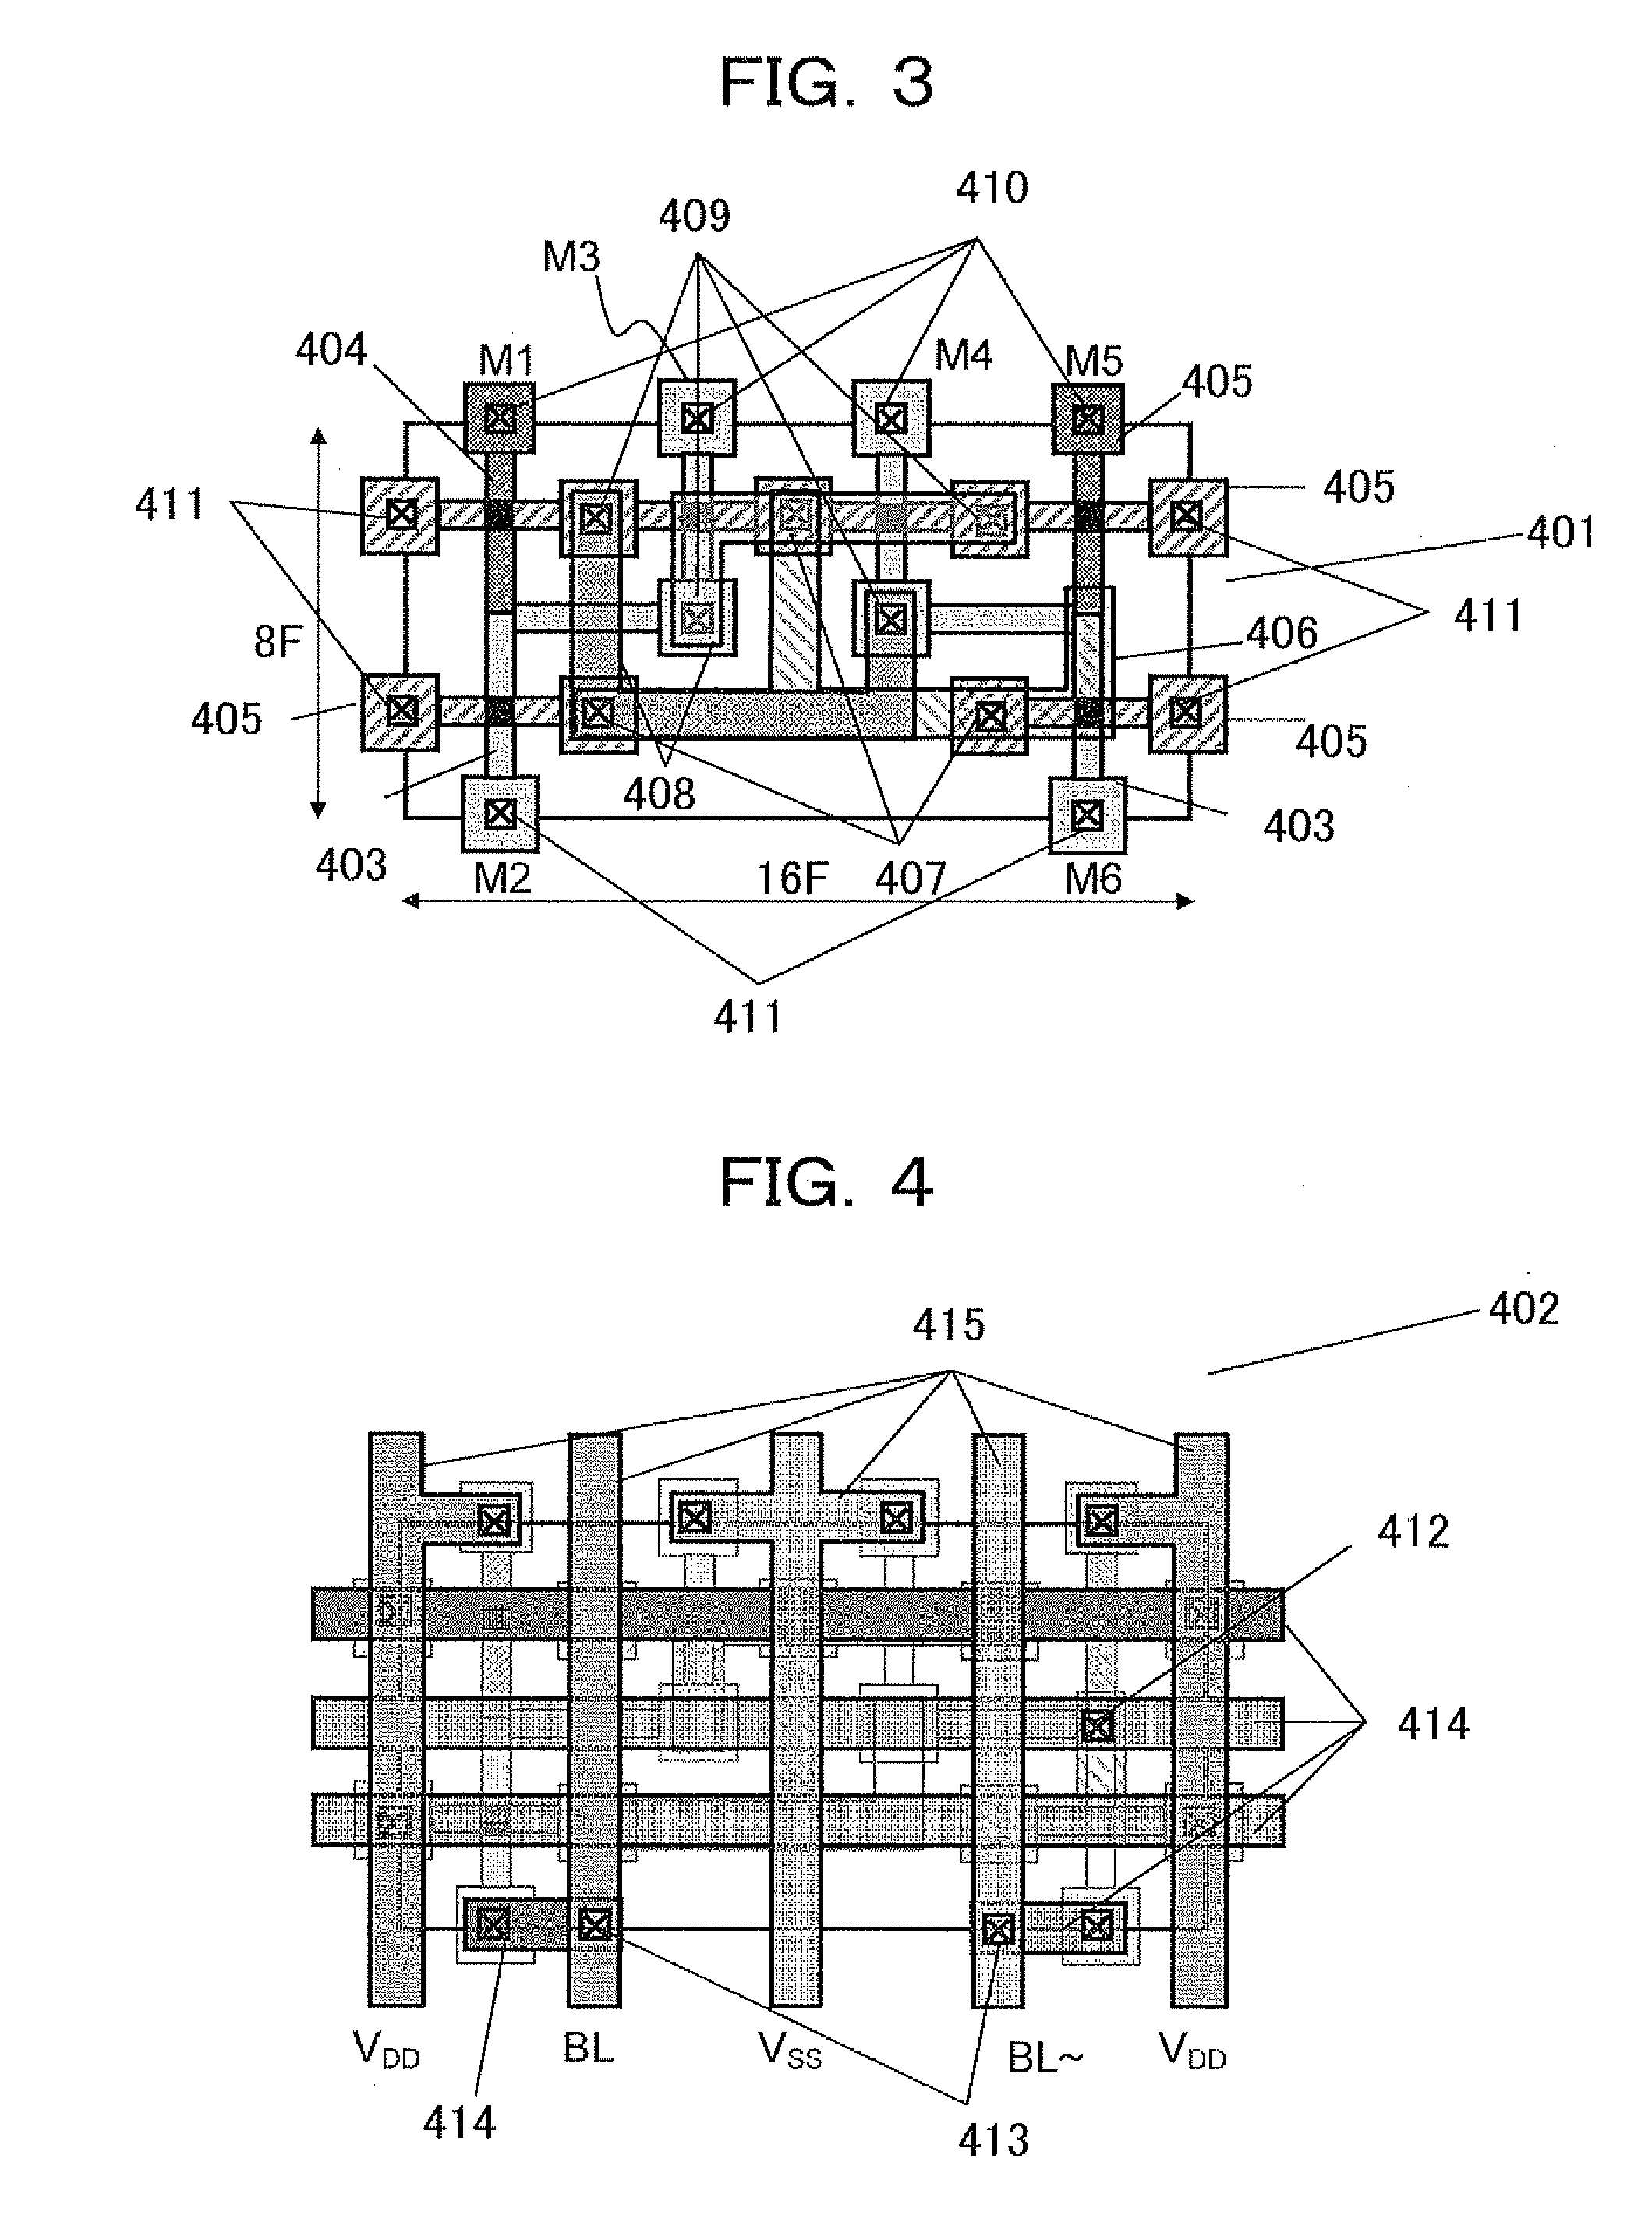 SRAM cell and SRAM device